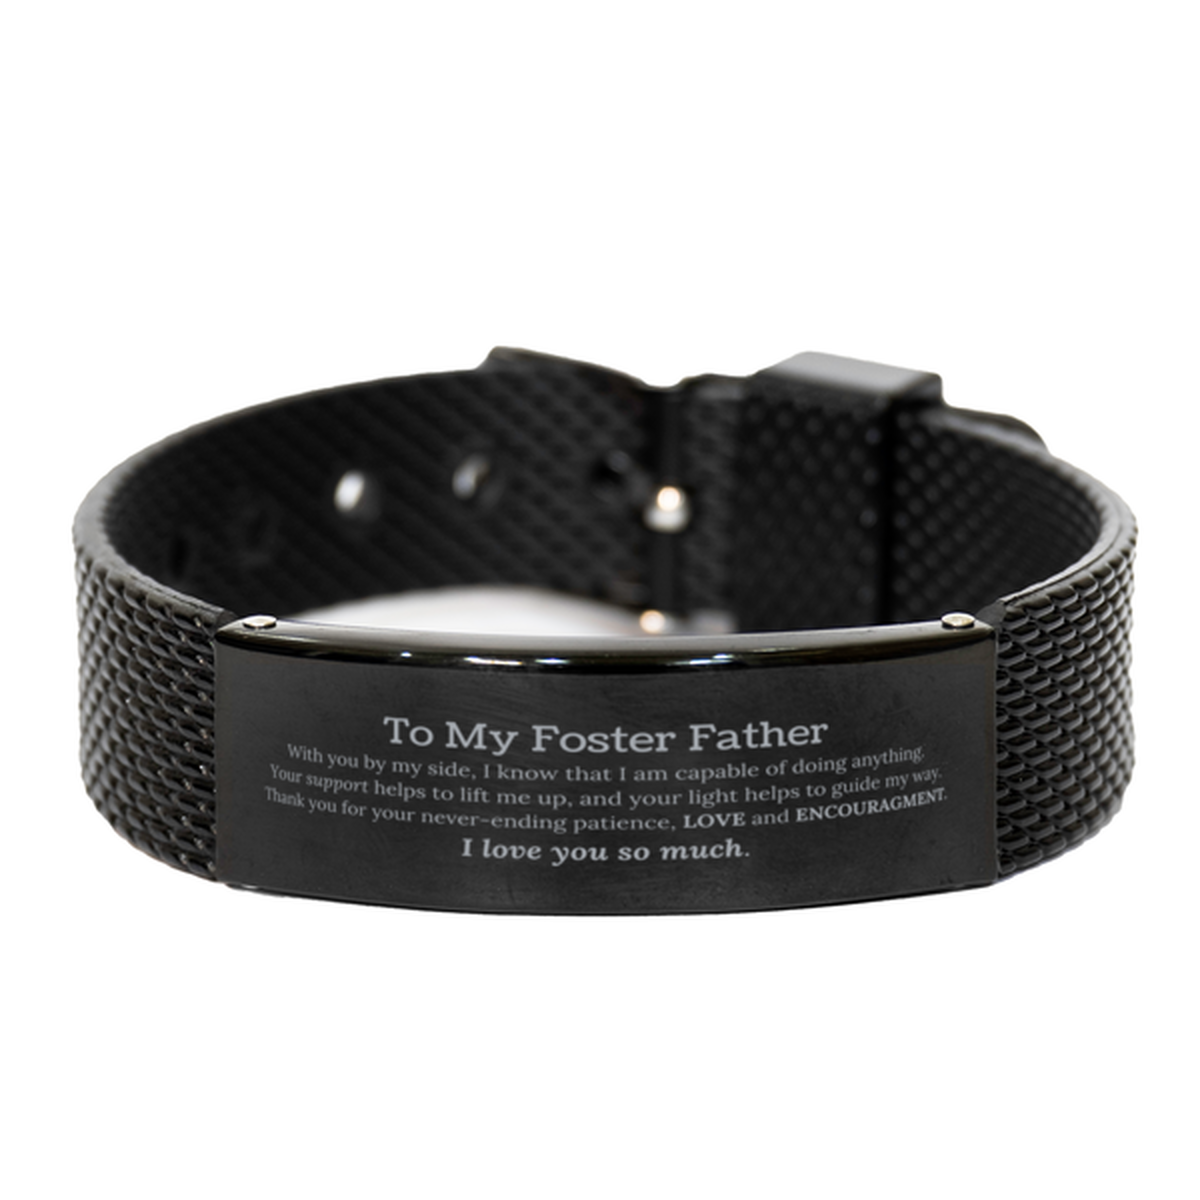 Appreciation Foster Father Black Shark Mesh Bracelet Gifts, To My Foster Father Birthday Christmas Wedding Keepsake Gifts for Foster Father With you by my side, I know that I am capable of doing anything. I love you so much